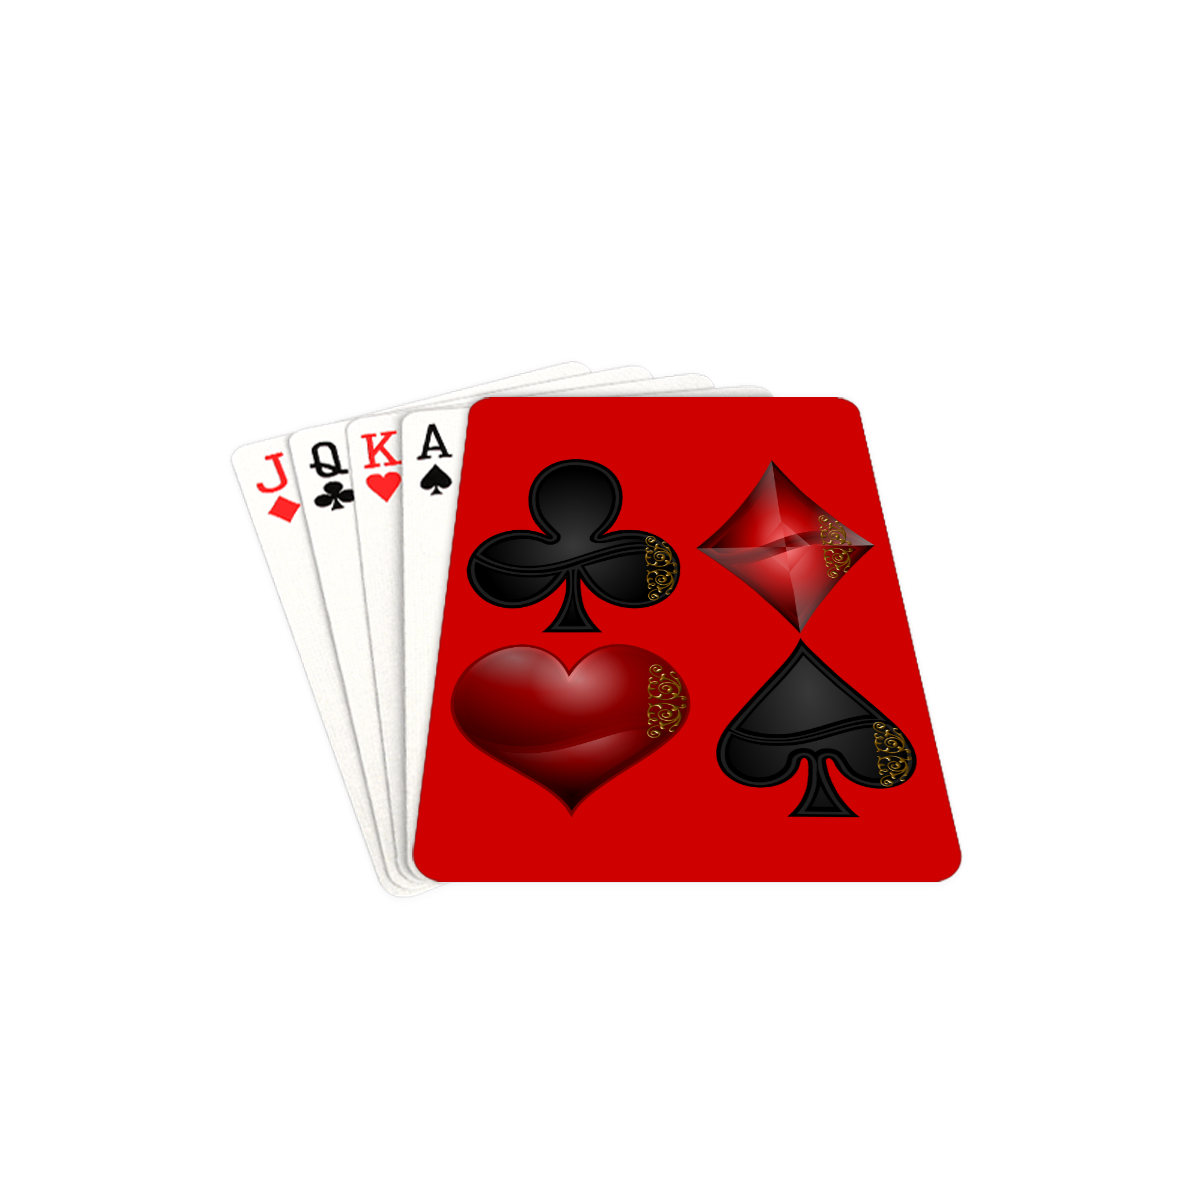 Las Vegas Black and Red Casino Poker Card Shapes on Red Playing Cards 2.5"x3.5"